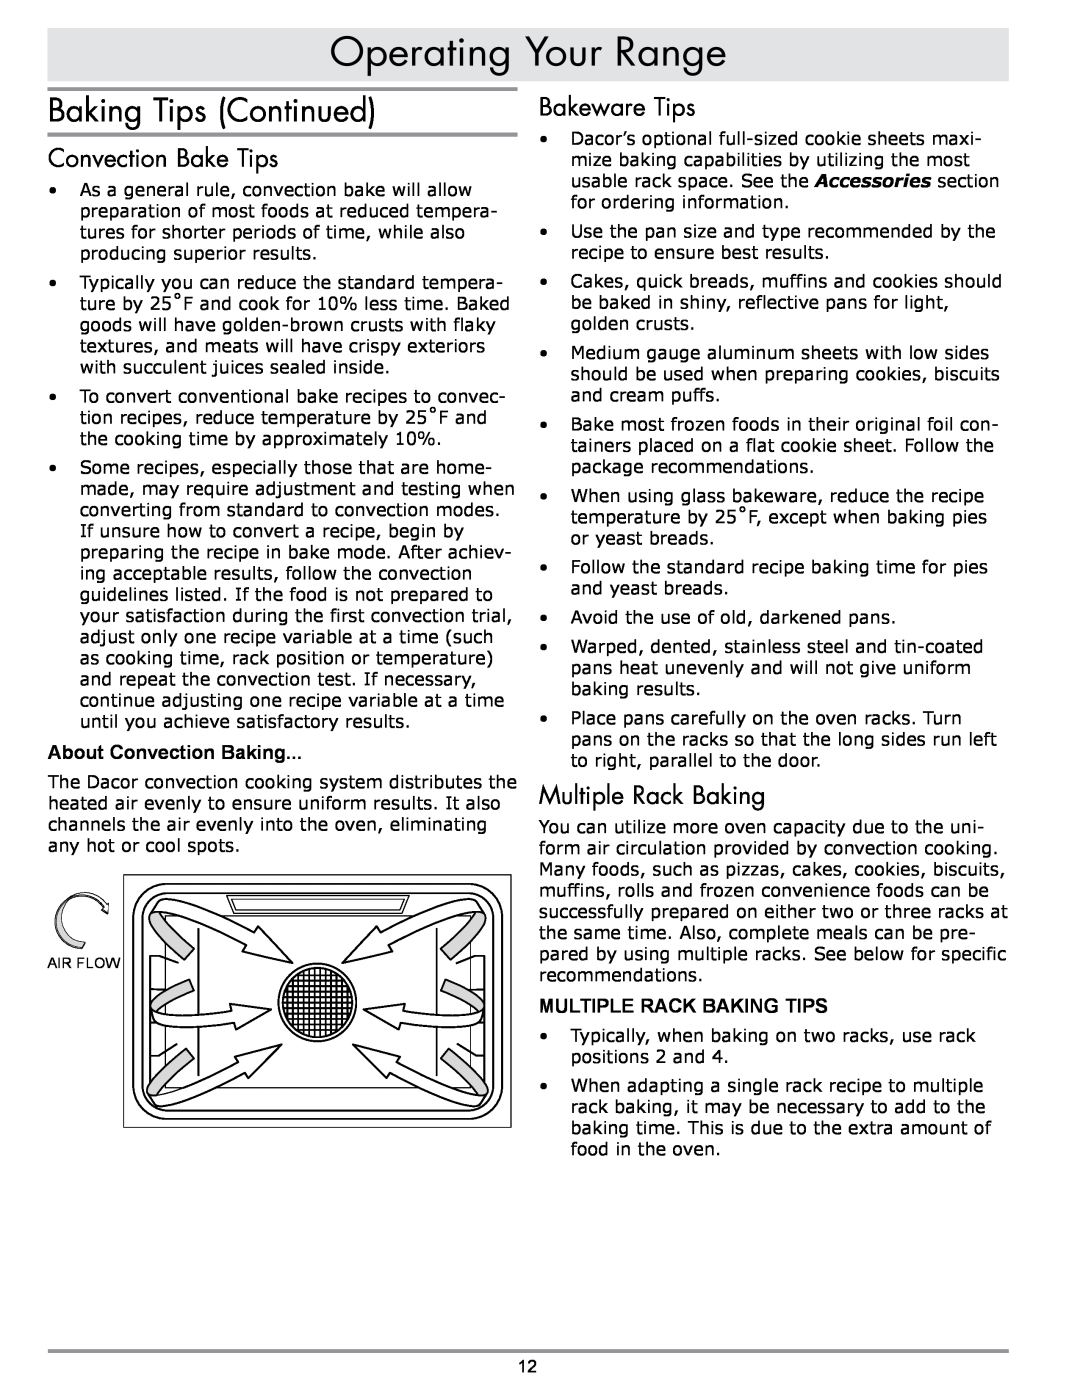 Sears ER30GI Baking Tips Continued, Convection Bake Tips, Bakeware Tips, Multiple Rack Baking, About Convection Baking 